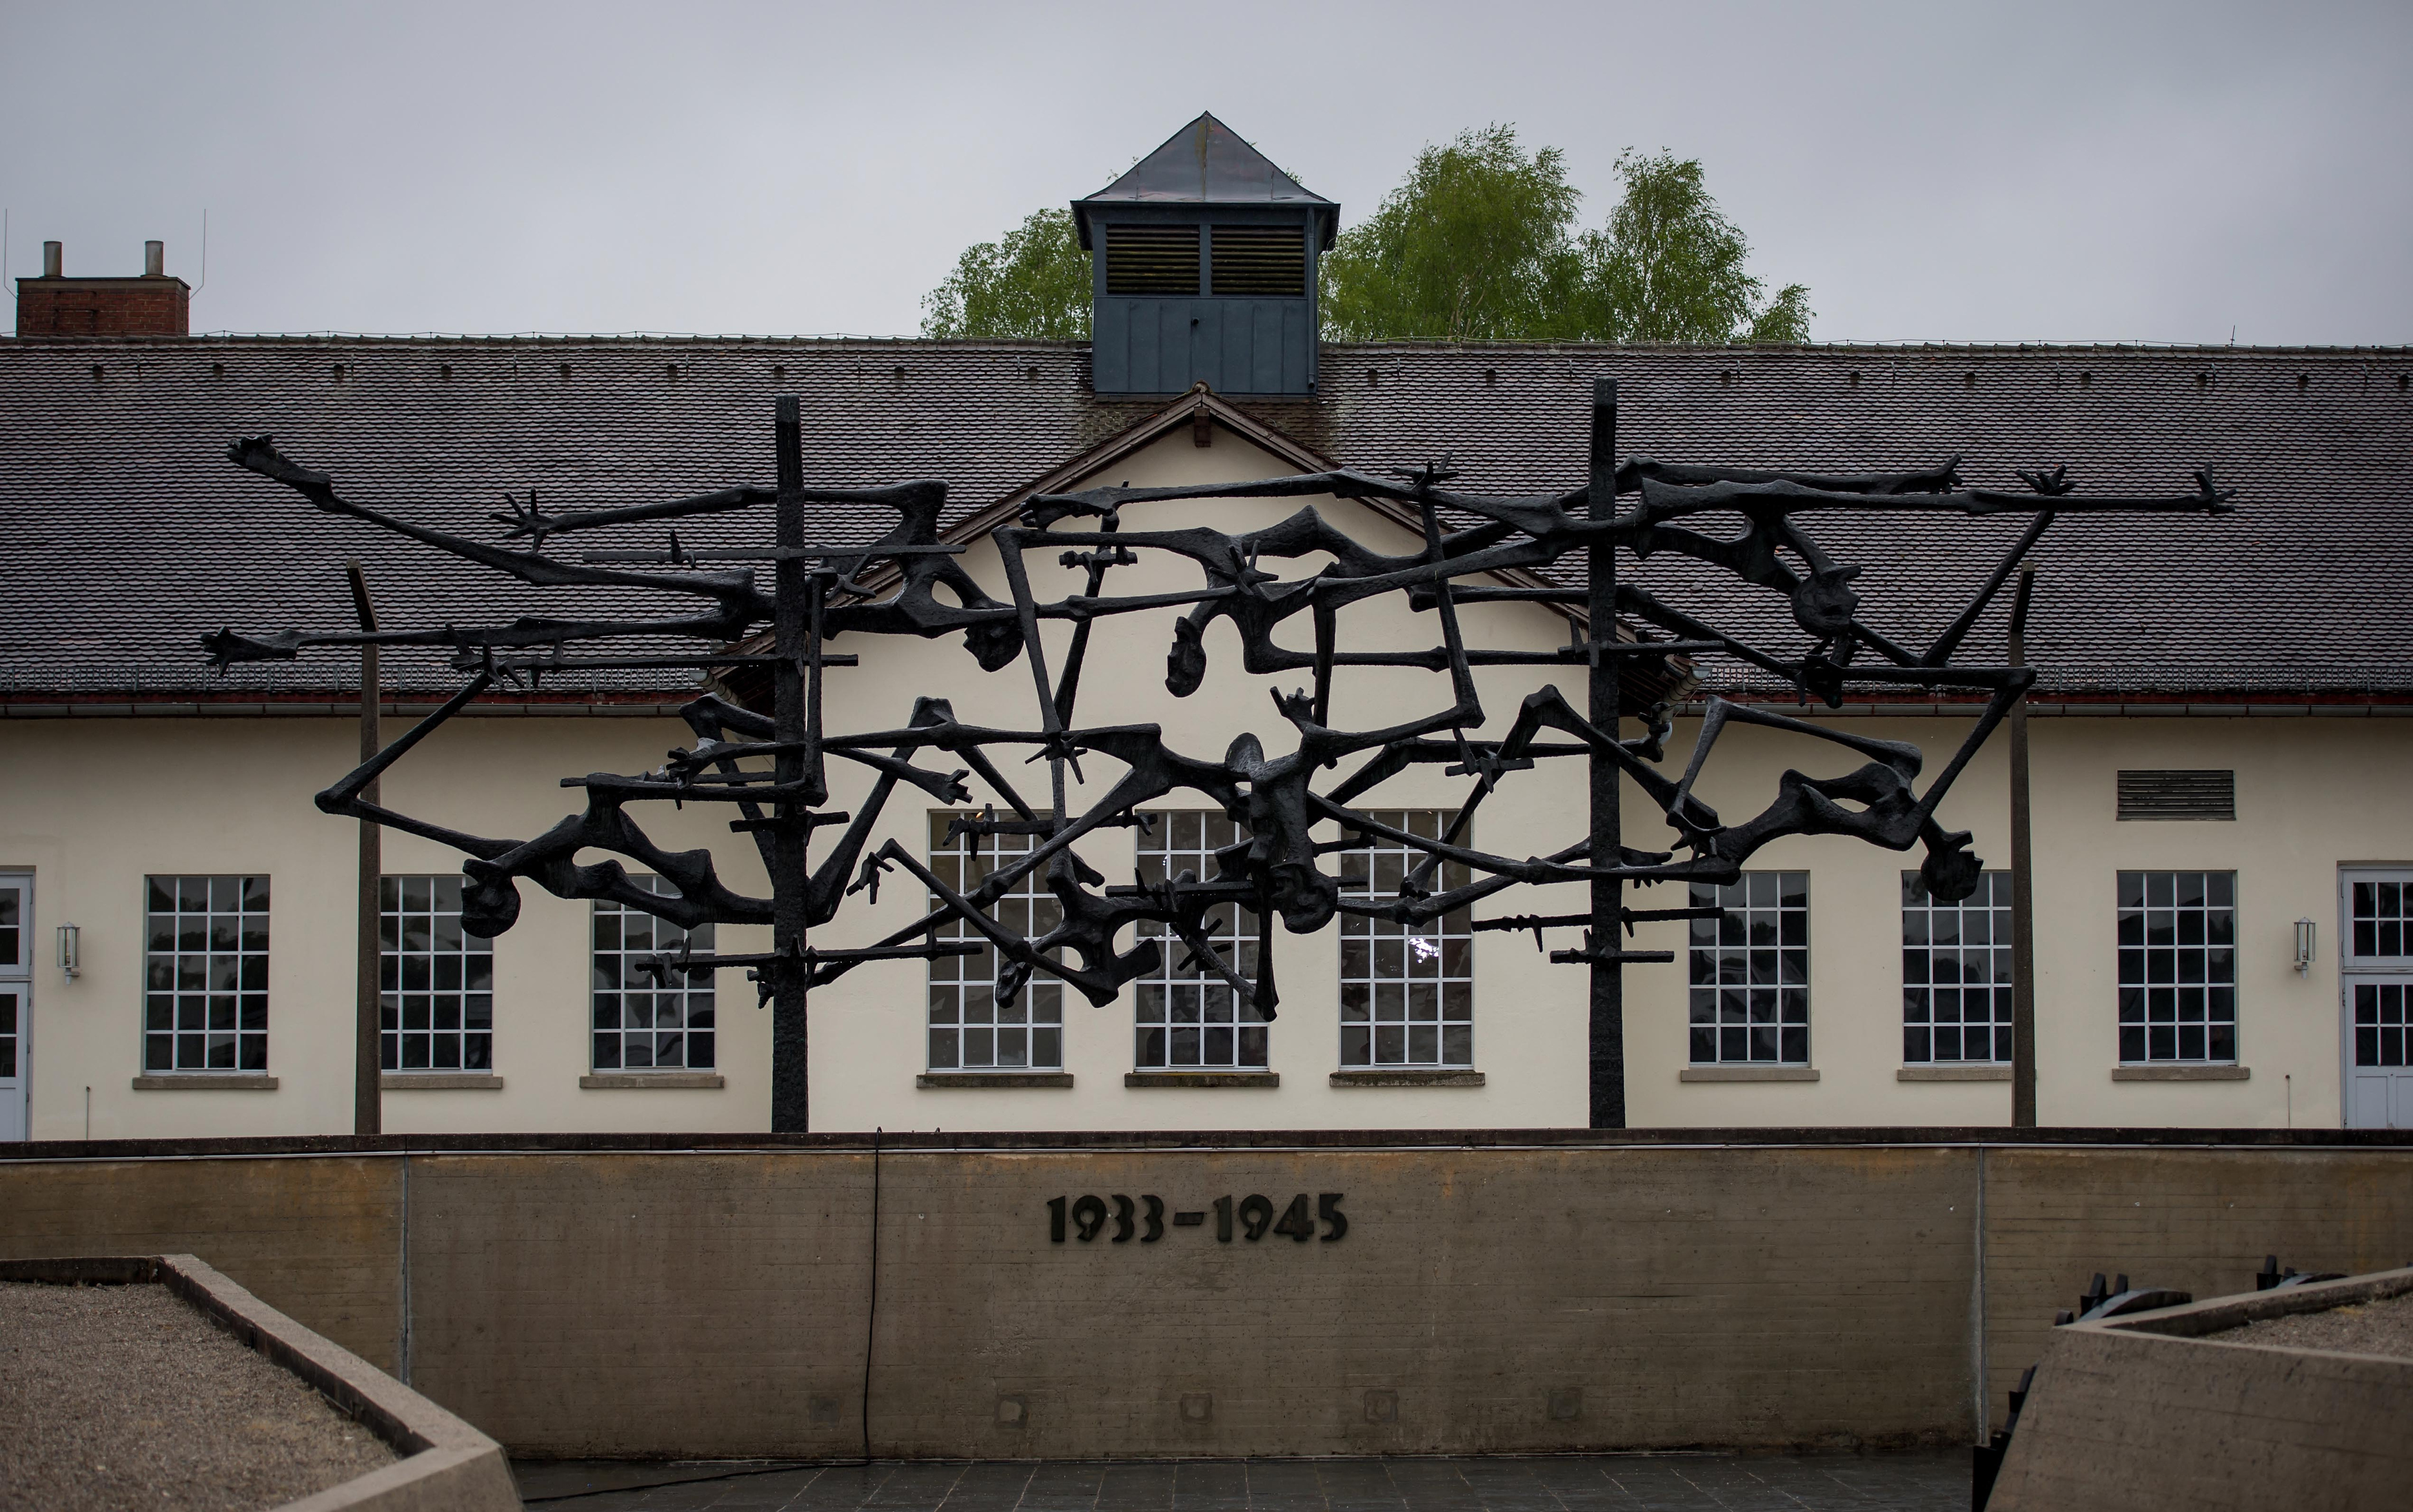 The central memorial of the former Dachau concentration camp site, seen on May 1, 2015 in Dachau, Germany. (Joerg Koch—Getty Images)